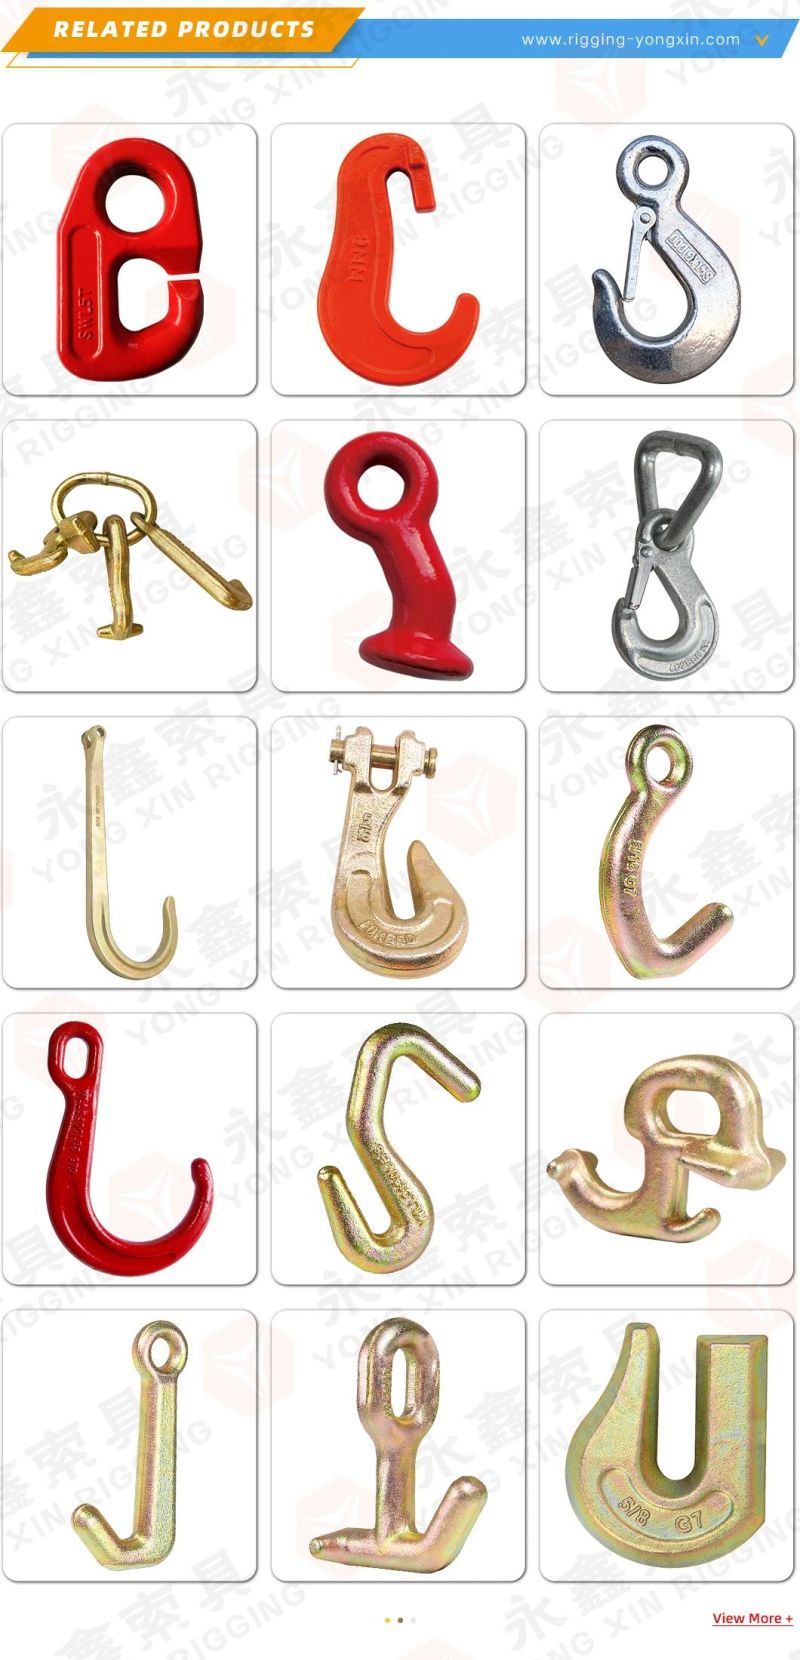 High Quality Alloy Triangle Ring Load Hook for Webbing Manufactures